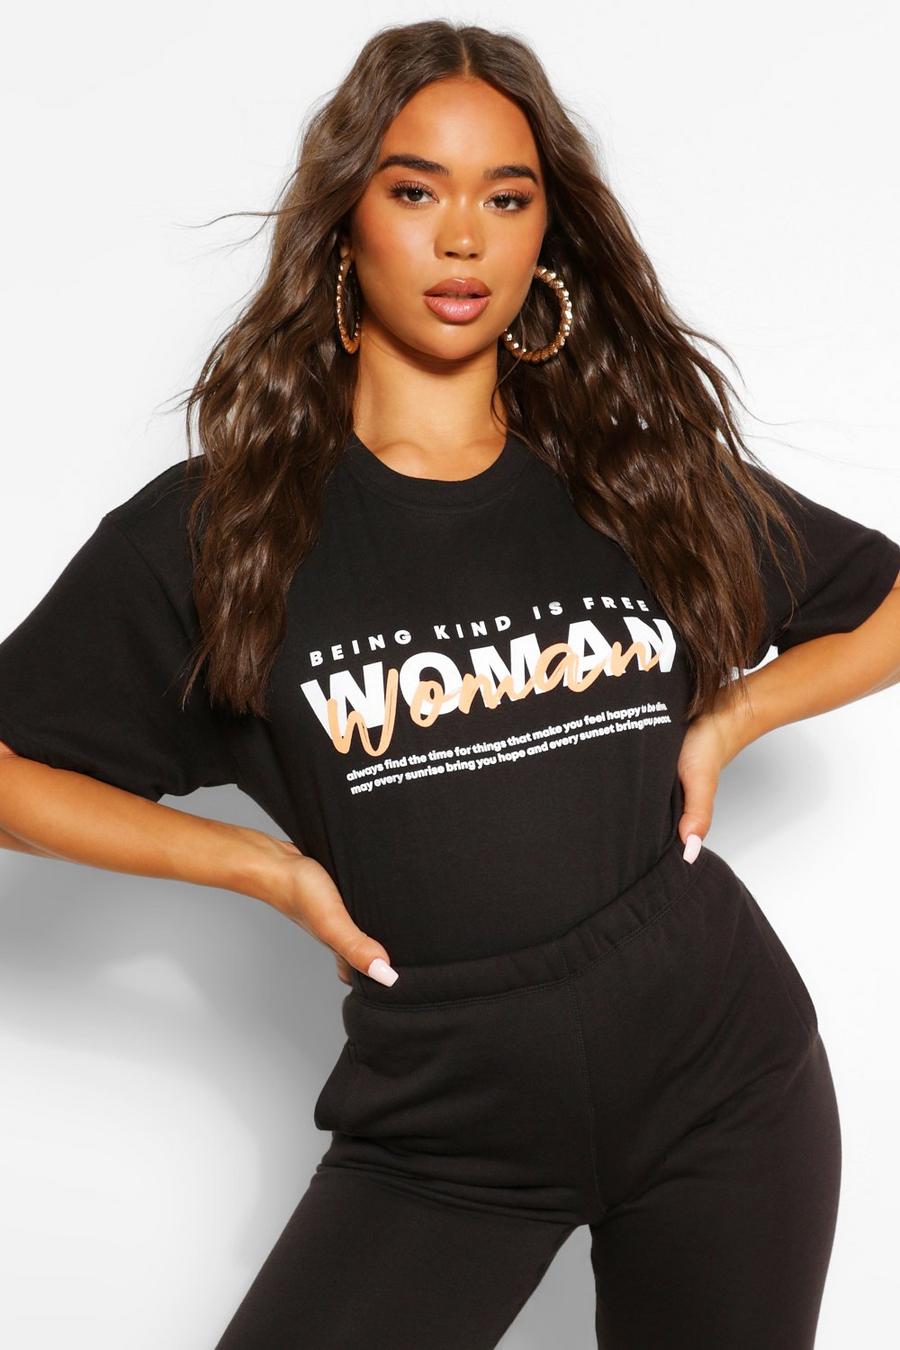 Black Woman "Being Kind Is Free" T-shirt med tryck image number 1